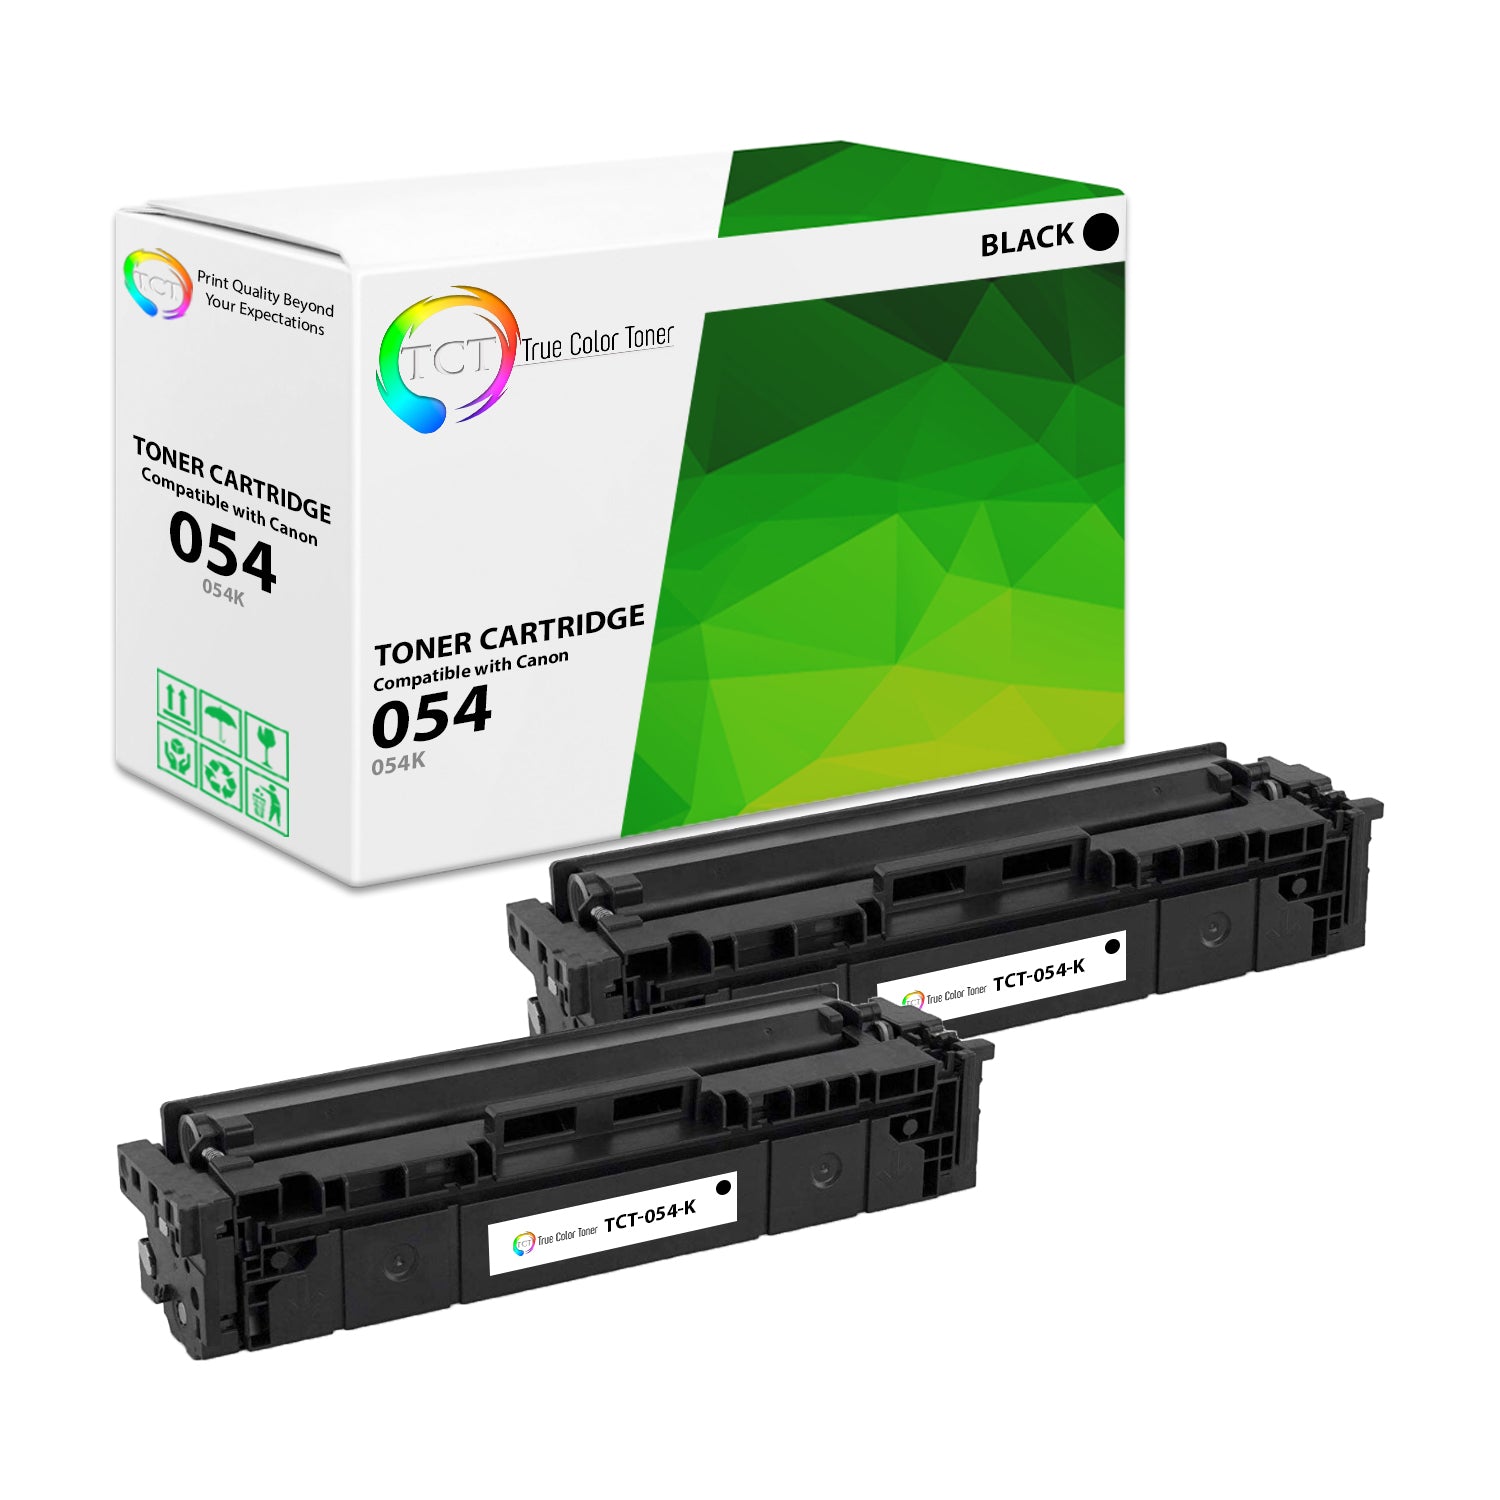 TCT Compatible Toner Cartridge Replacement for the Canon 054 Series - 2 Pack Black